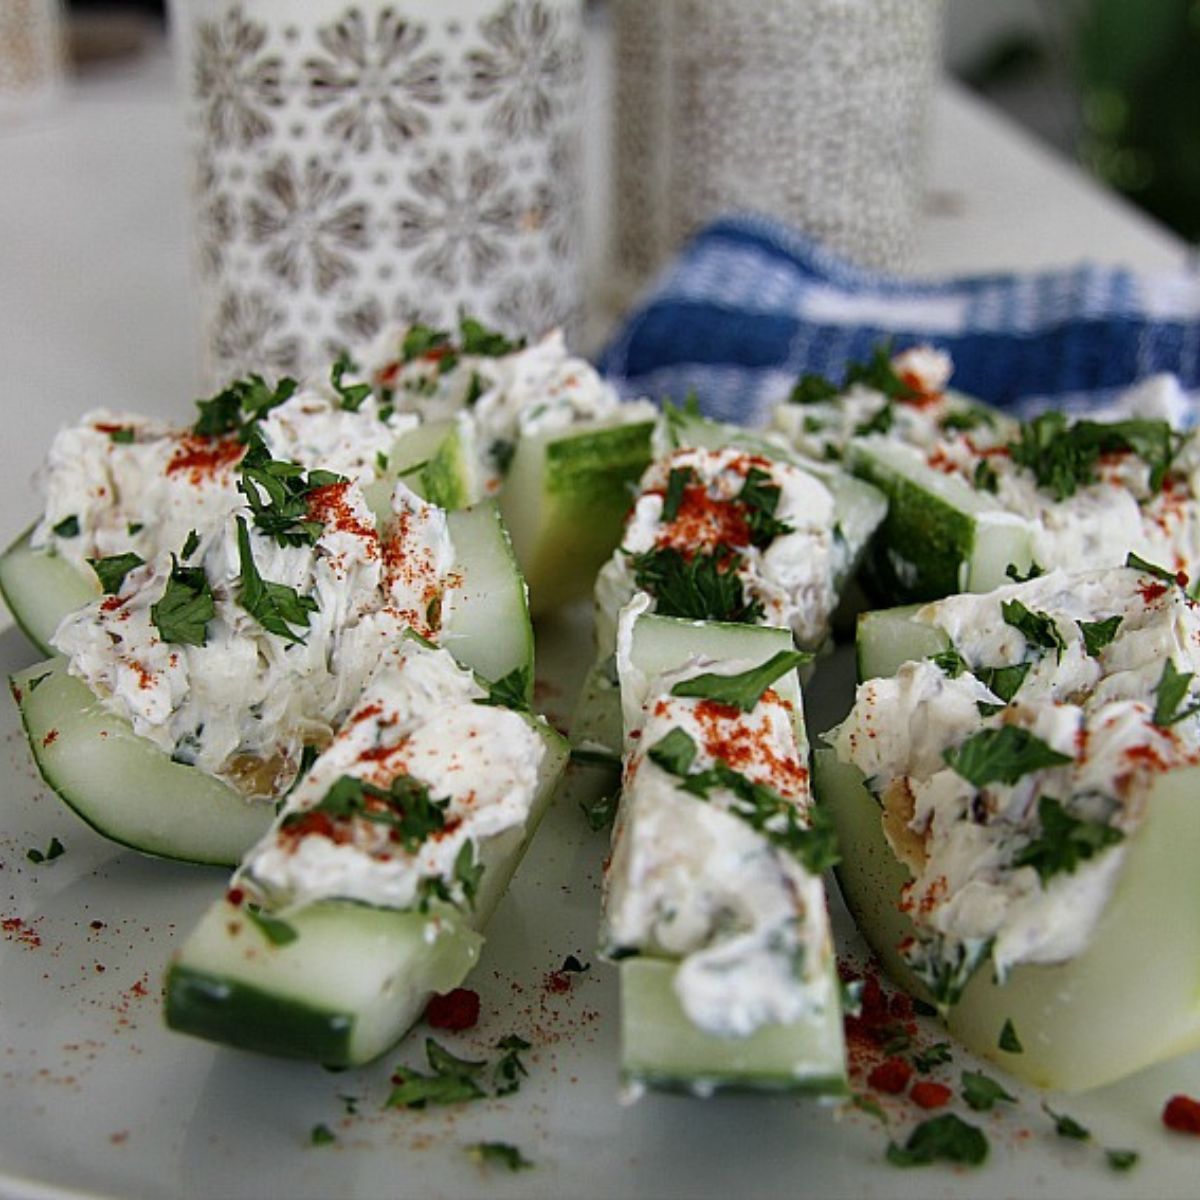 Cucumber bites topped with feta cheese and herbs on a plate.